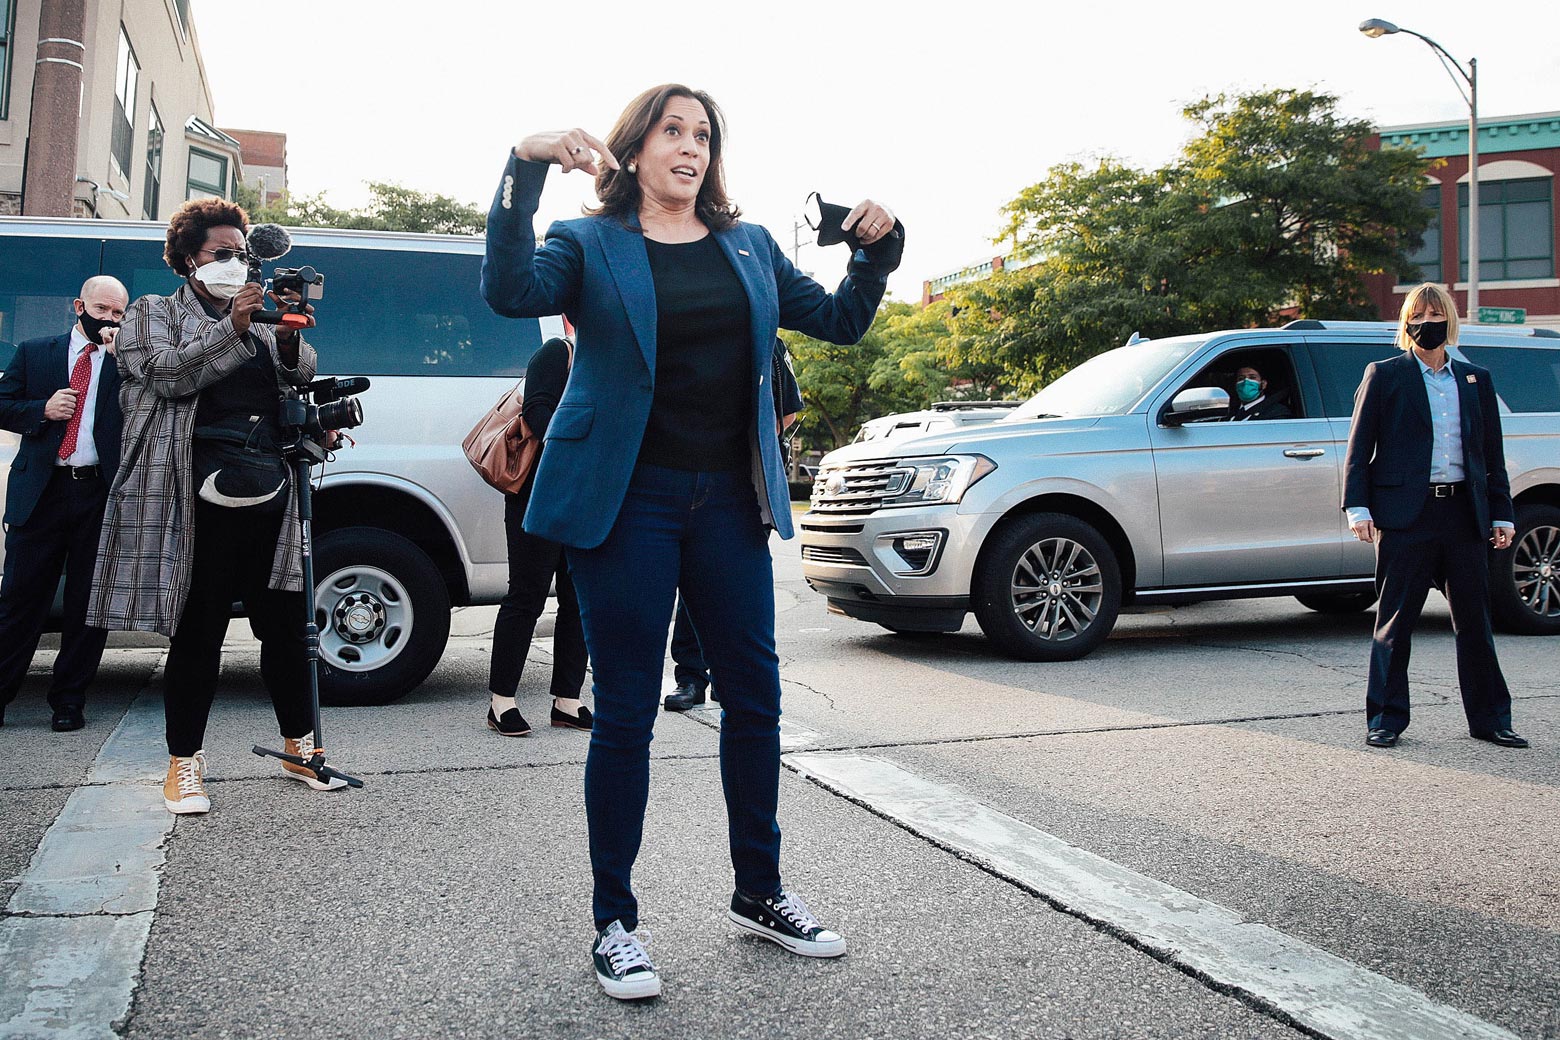 Harris, wearing a business casual outfit and Converse sneakers, stands on the pavement addressing supporters